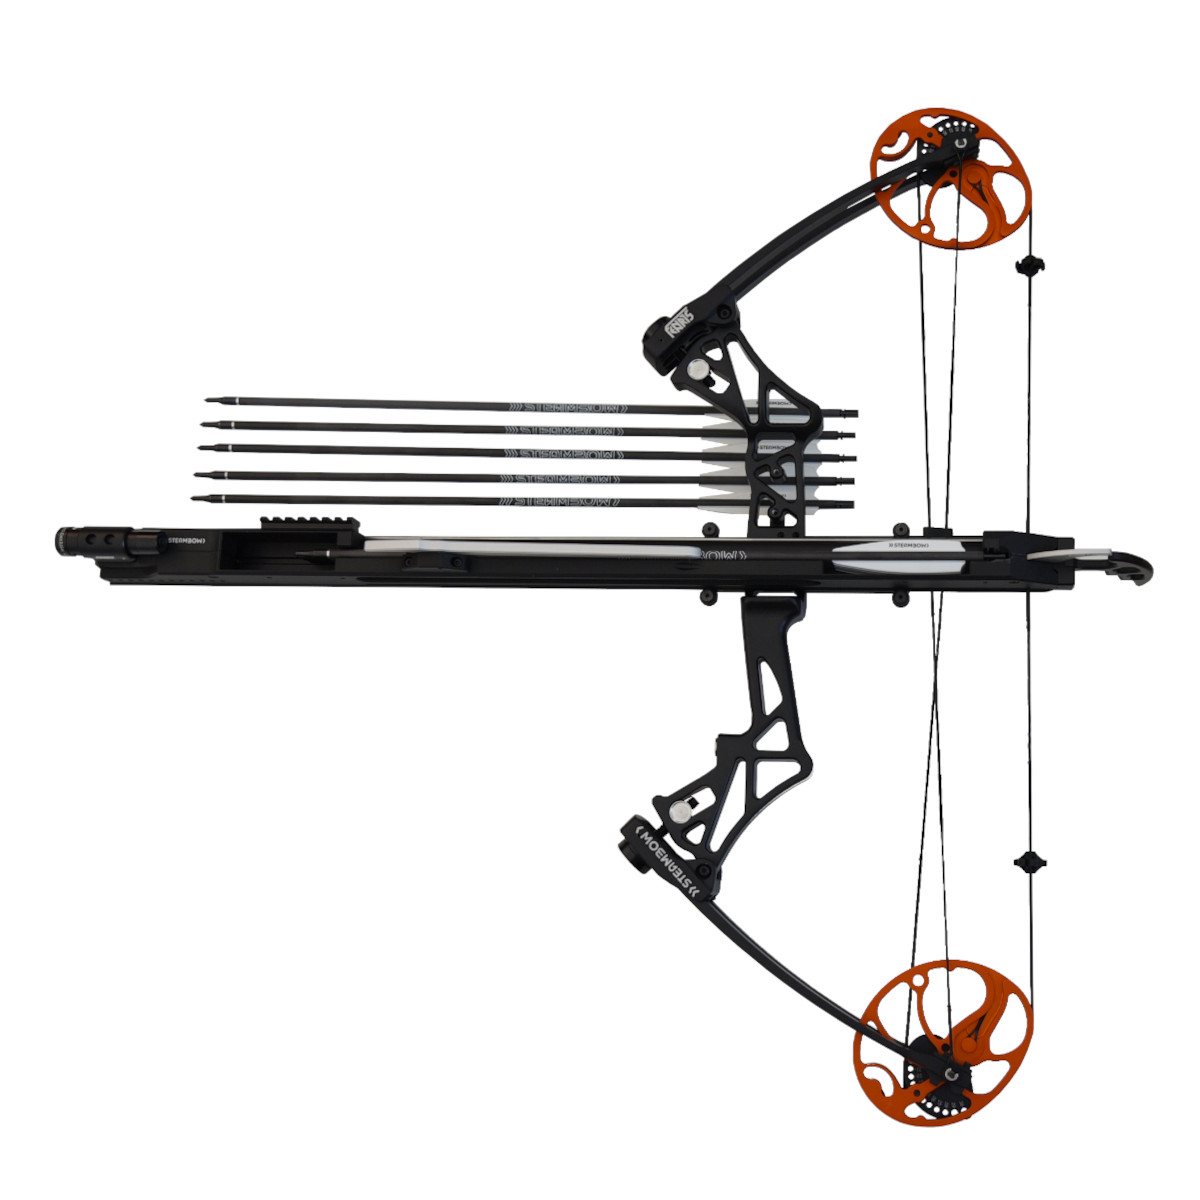 Steambow FENRIS – magazine with compound bow ”M1″ with laser sight, orange cams